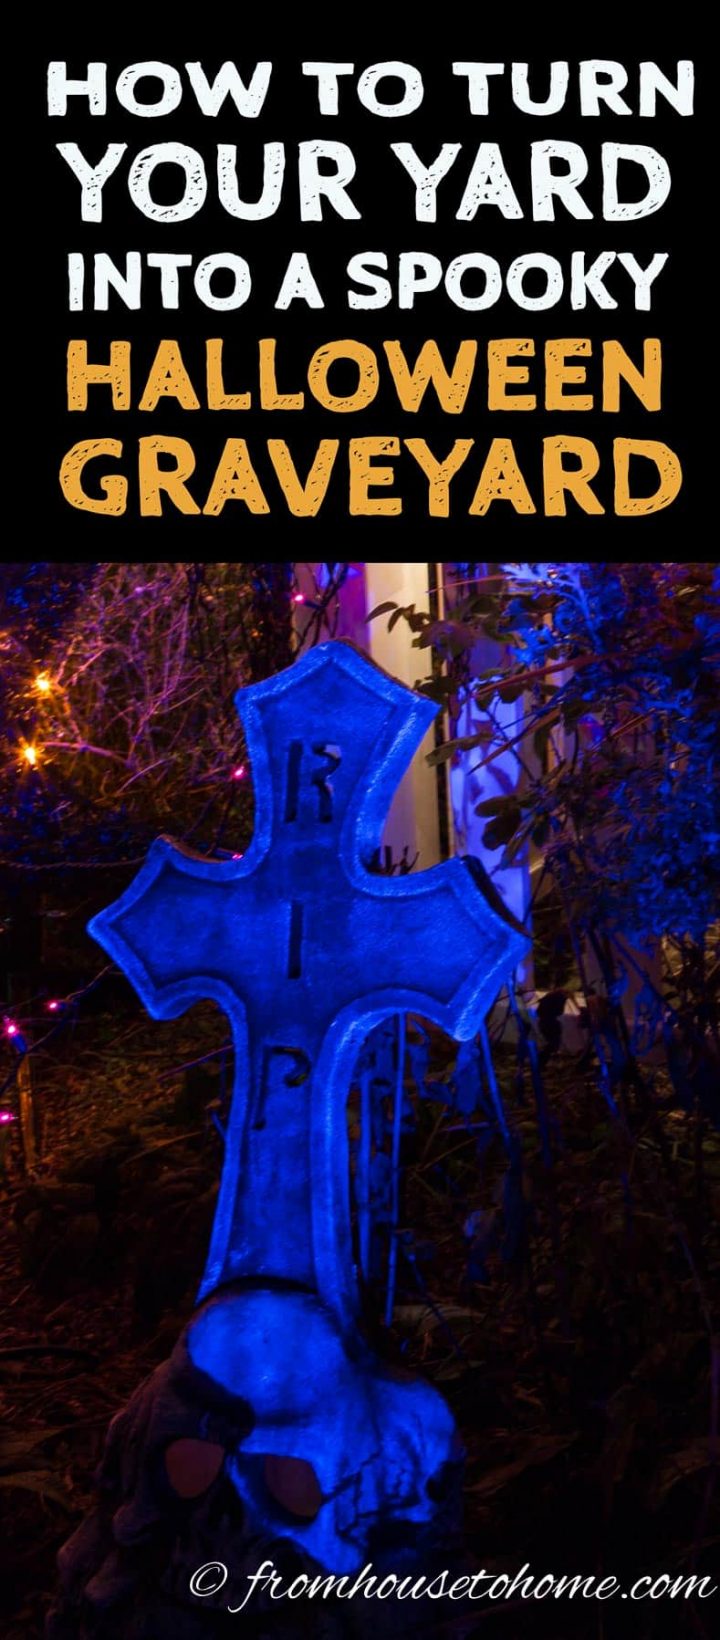 Use blue spotlights to highlight a tombstone